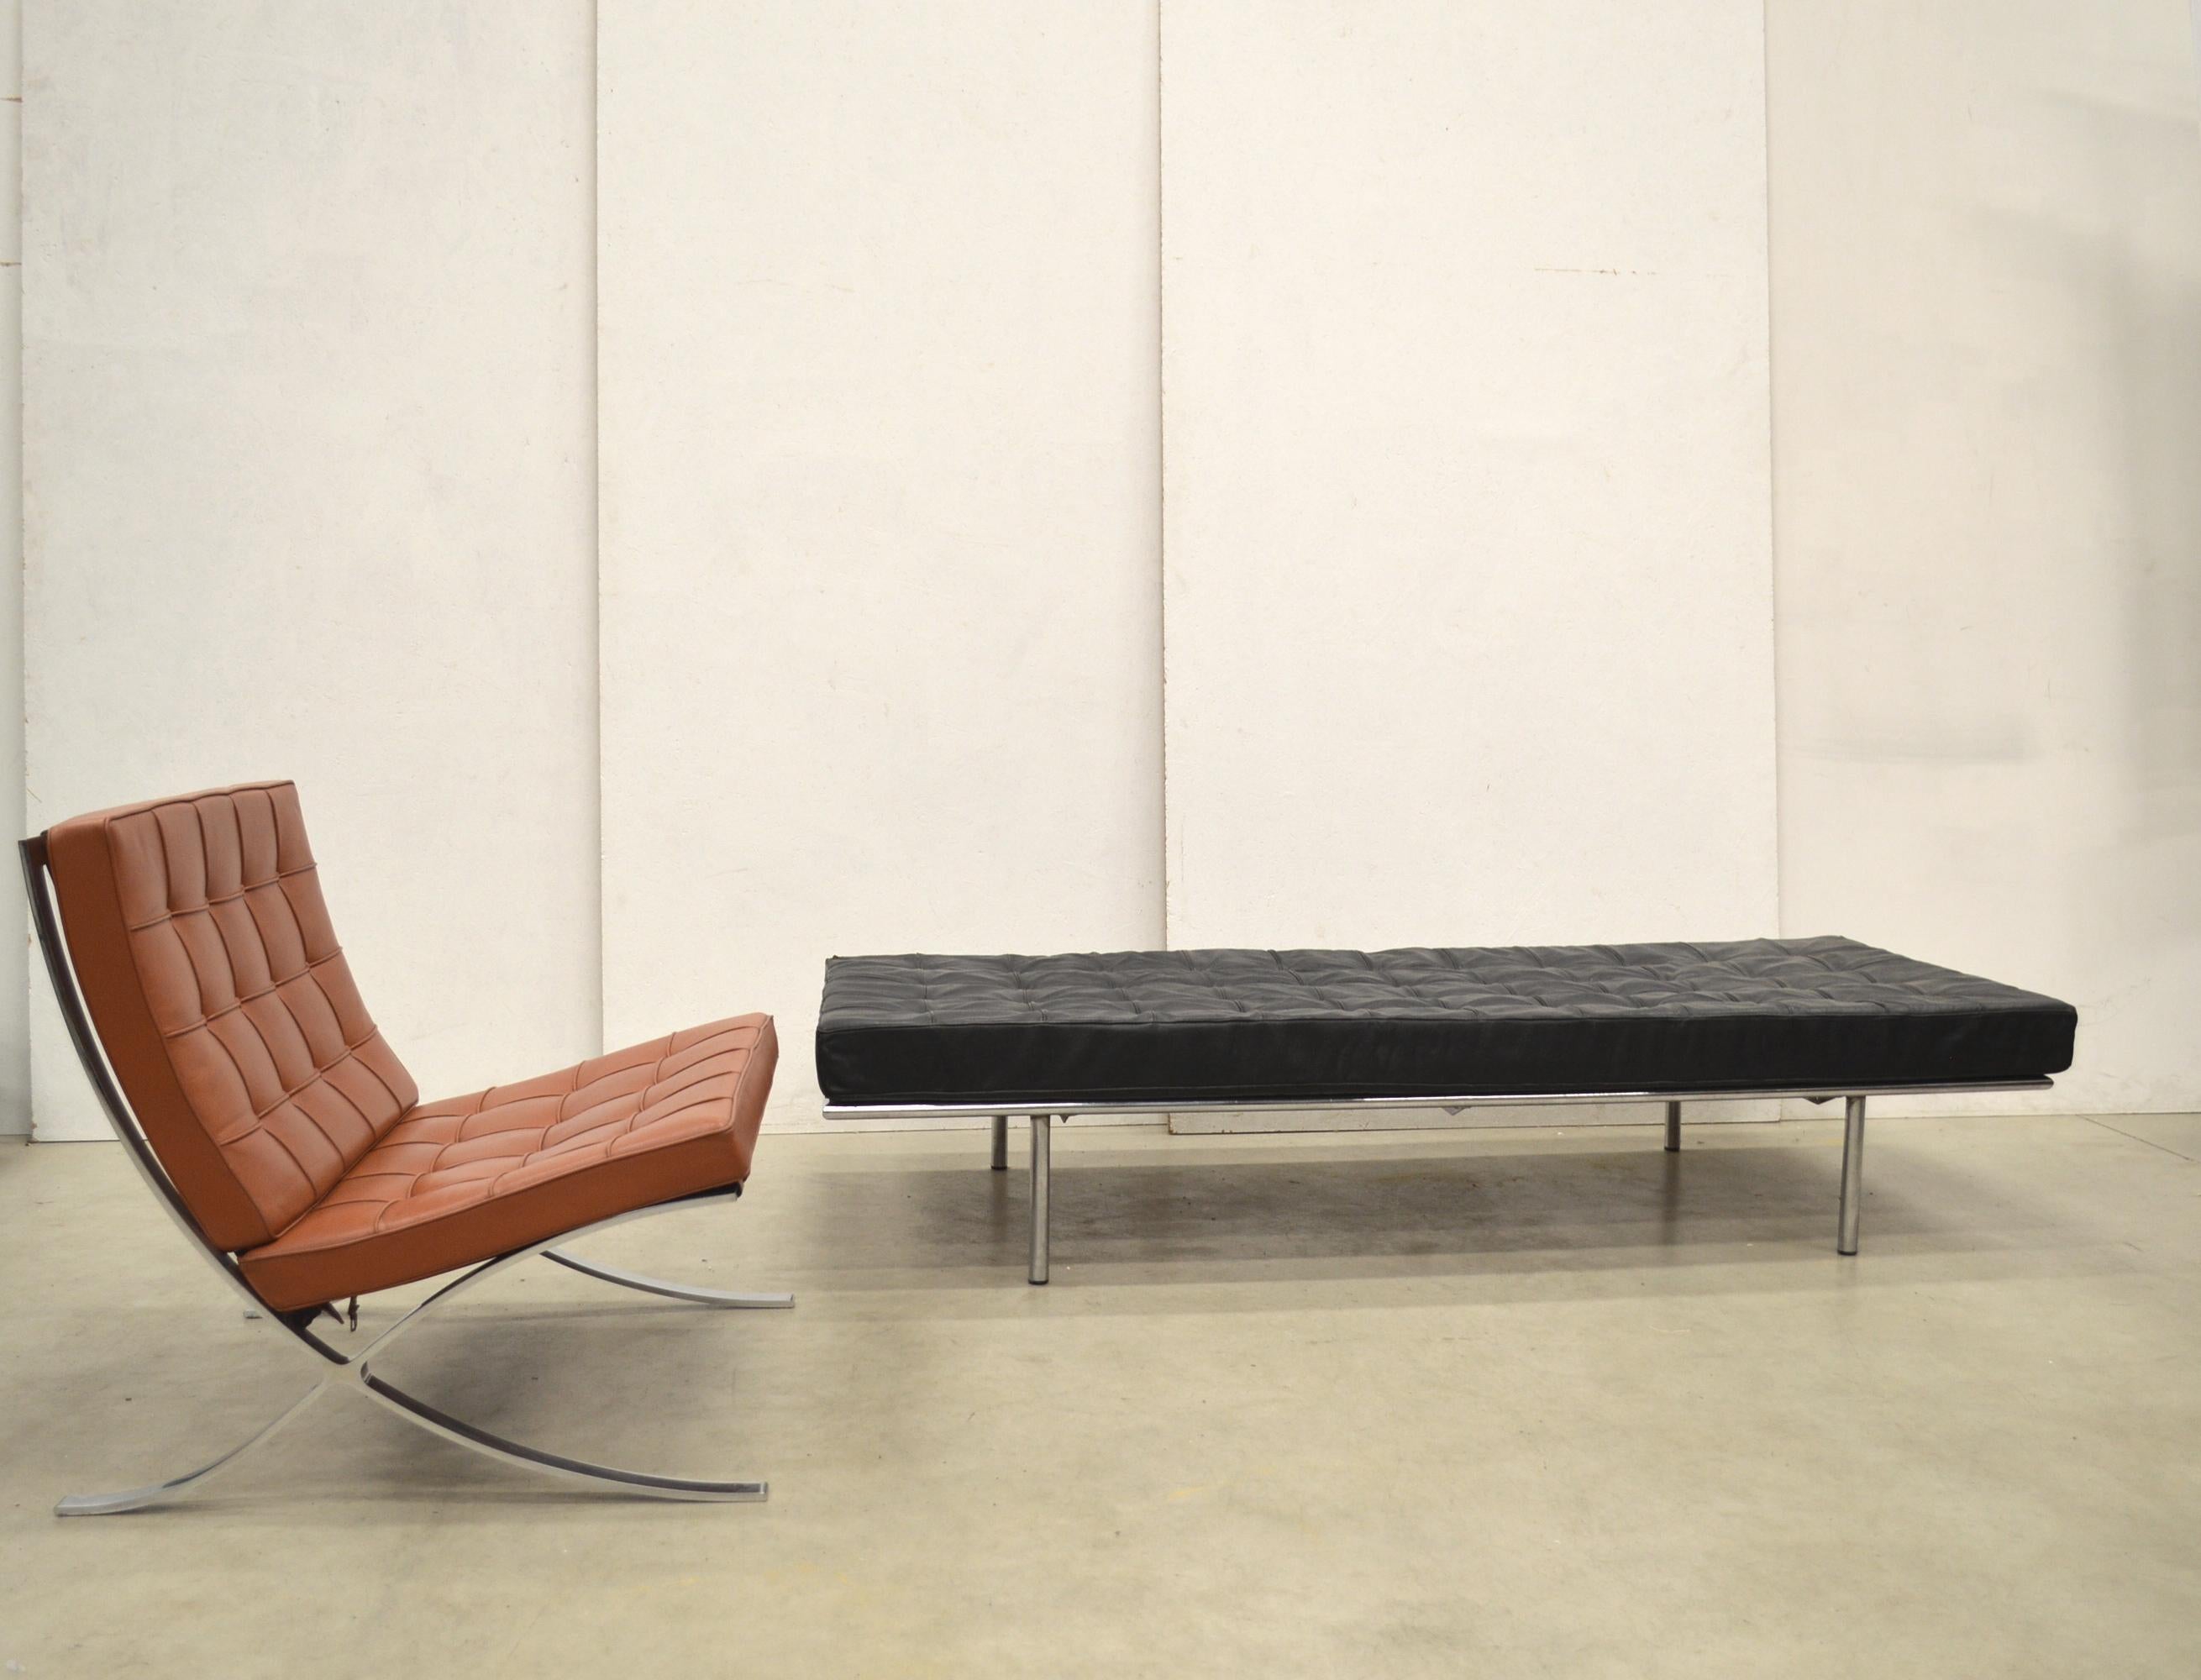 This very rare and early Barcelona daybed was designed by Mies van der Rohe and produced by Knoll International for only 3 years between 1962 and 1965. The piece is upholstered in its original black leather. The base is made from chromed steel, not